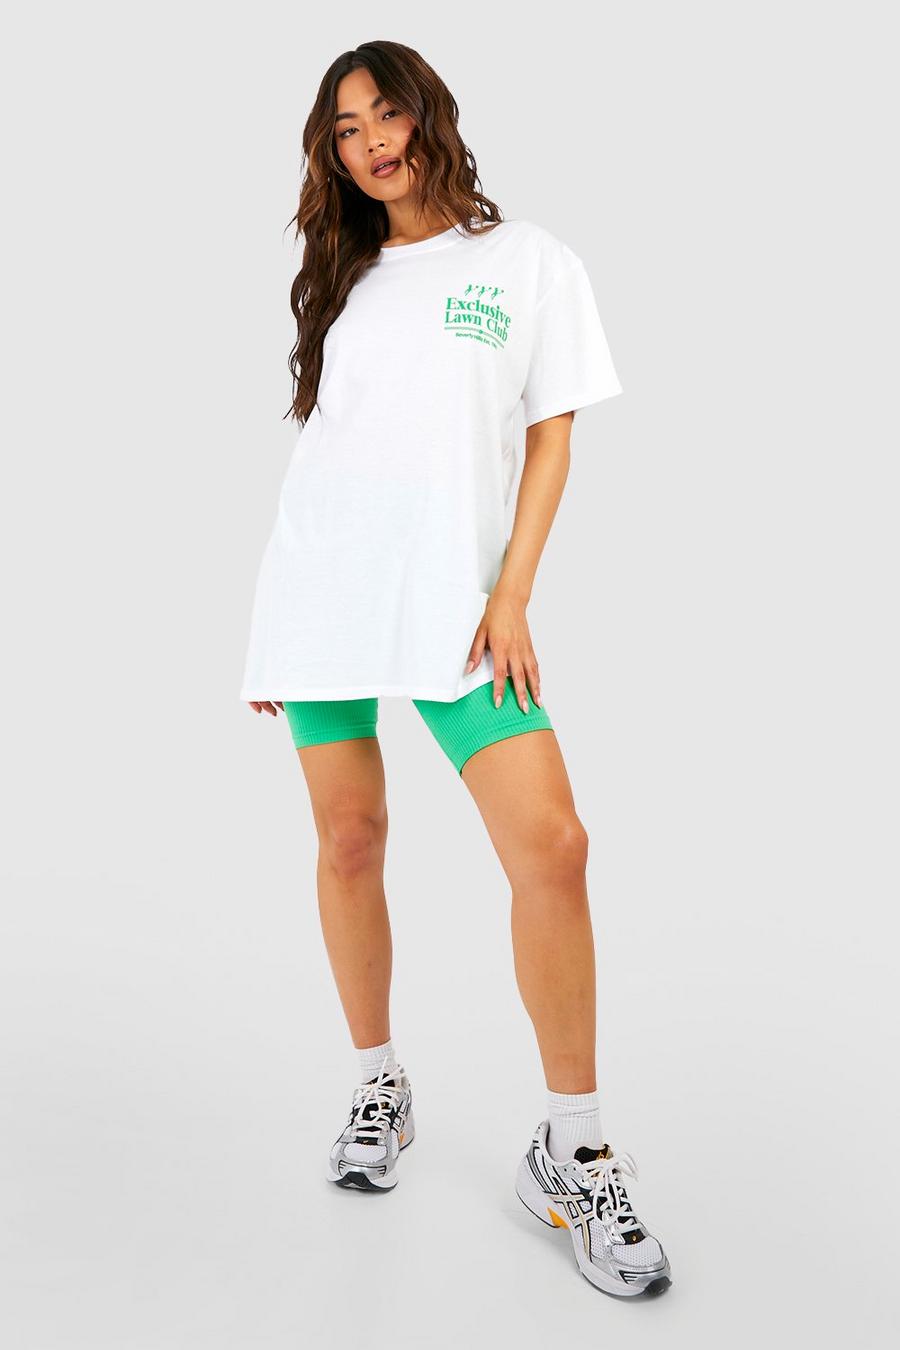 White Lawn Club Pocket Print Oversized T-shirt image number 1